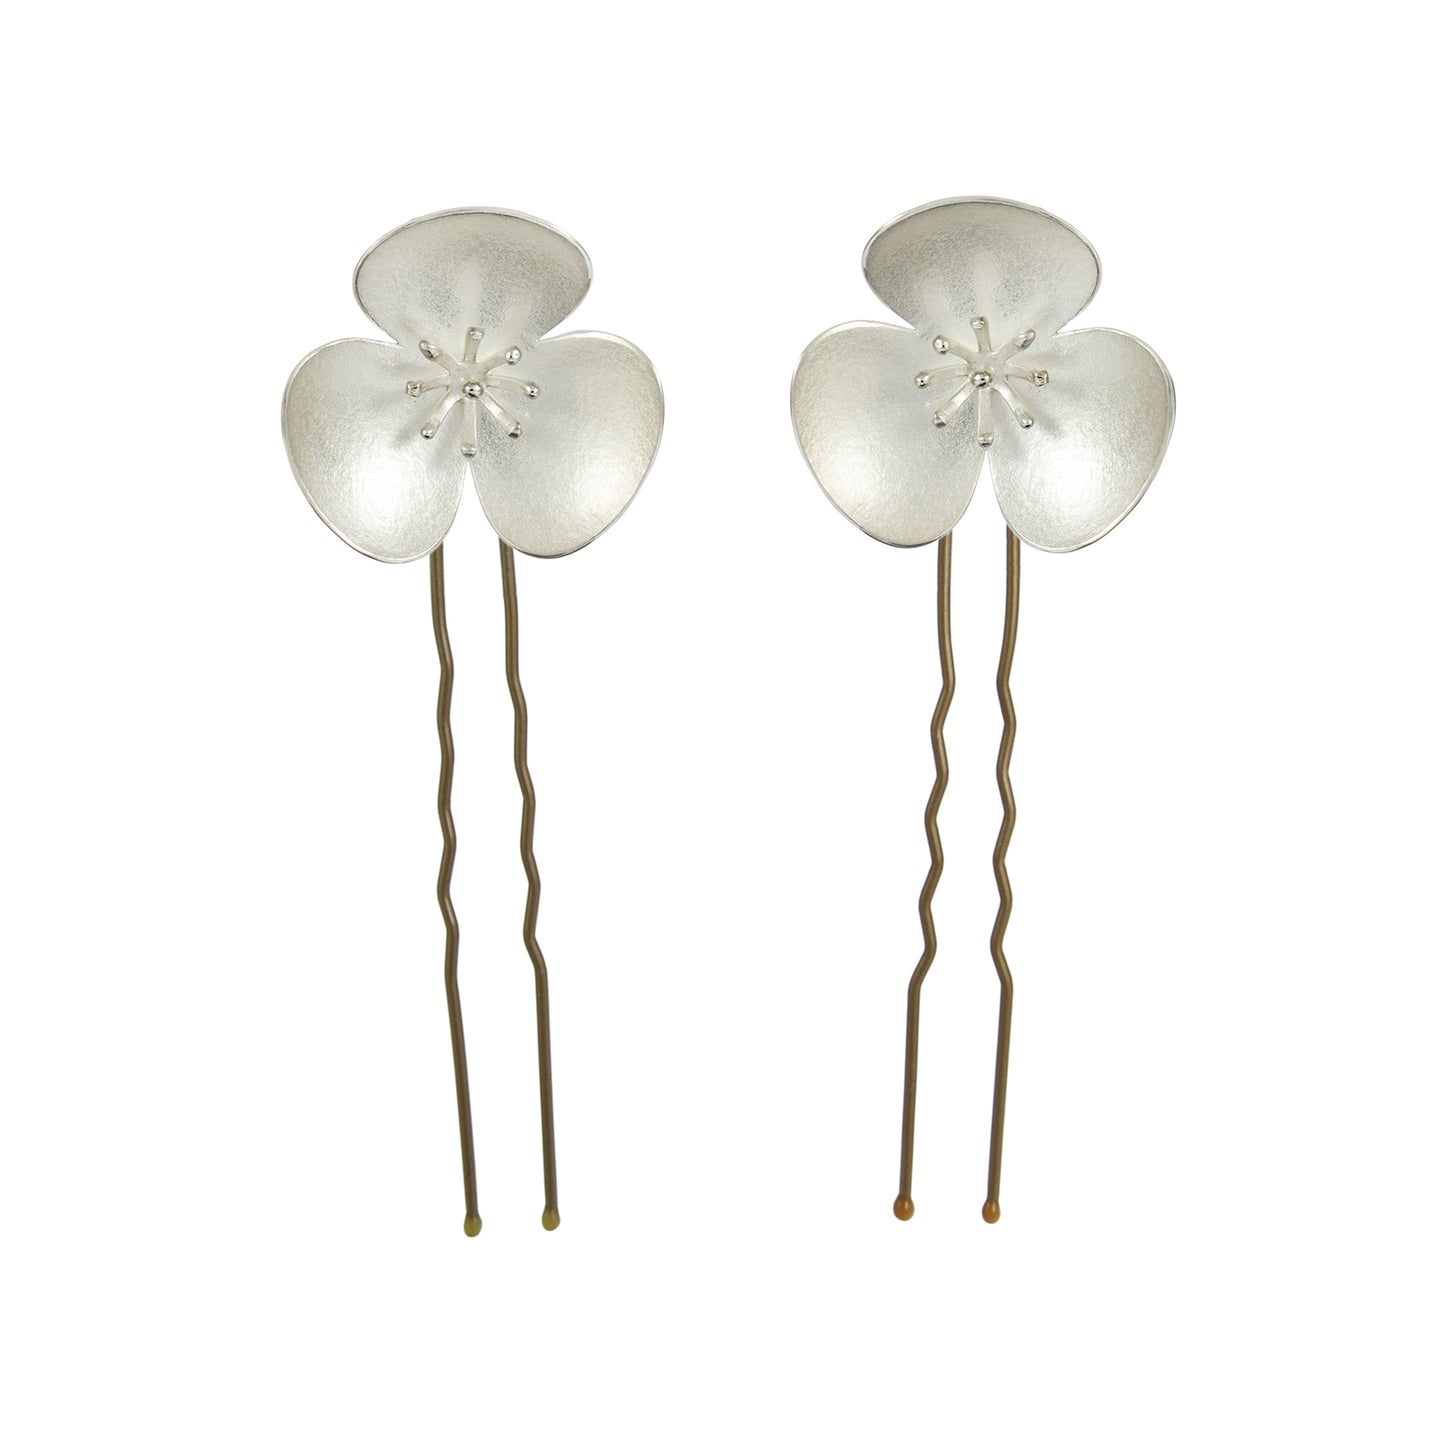 Two Silver Poppy hairpins, which instantly convert to a pair of earrings